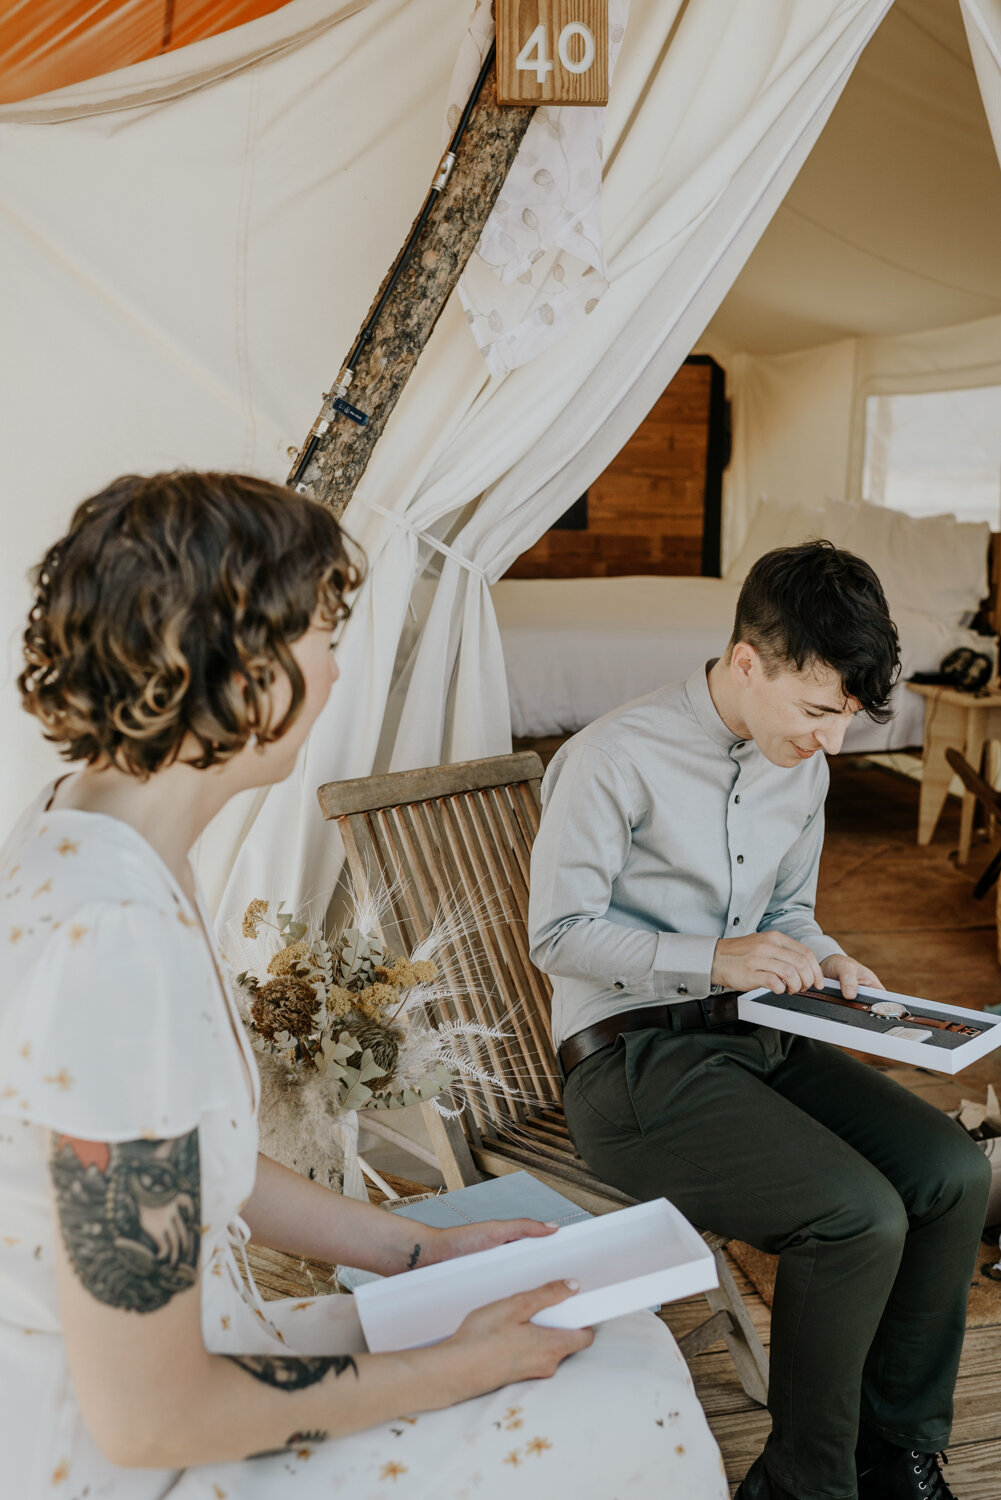 Under the Canvas in Moab, UT Sweet Elopement Celebration